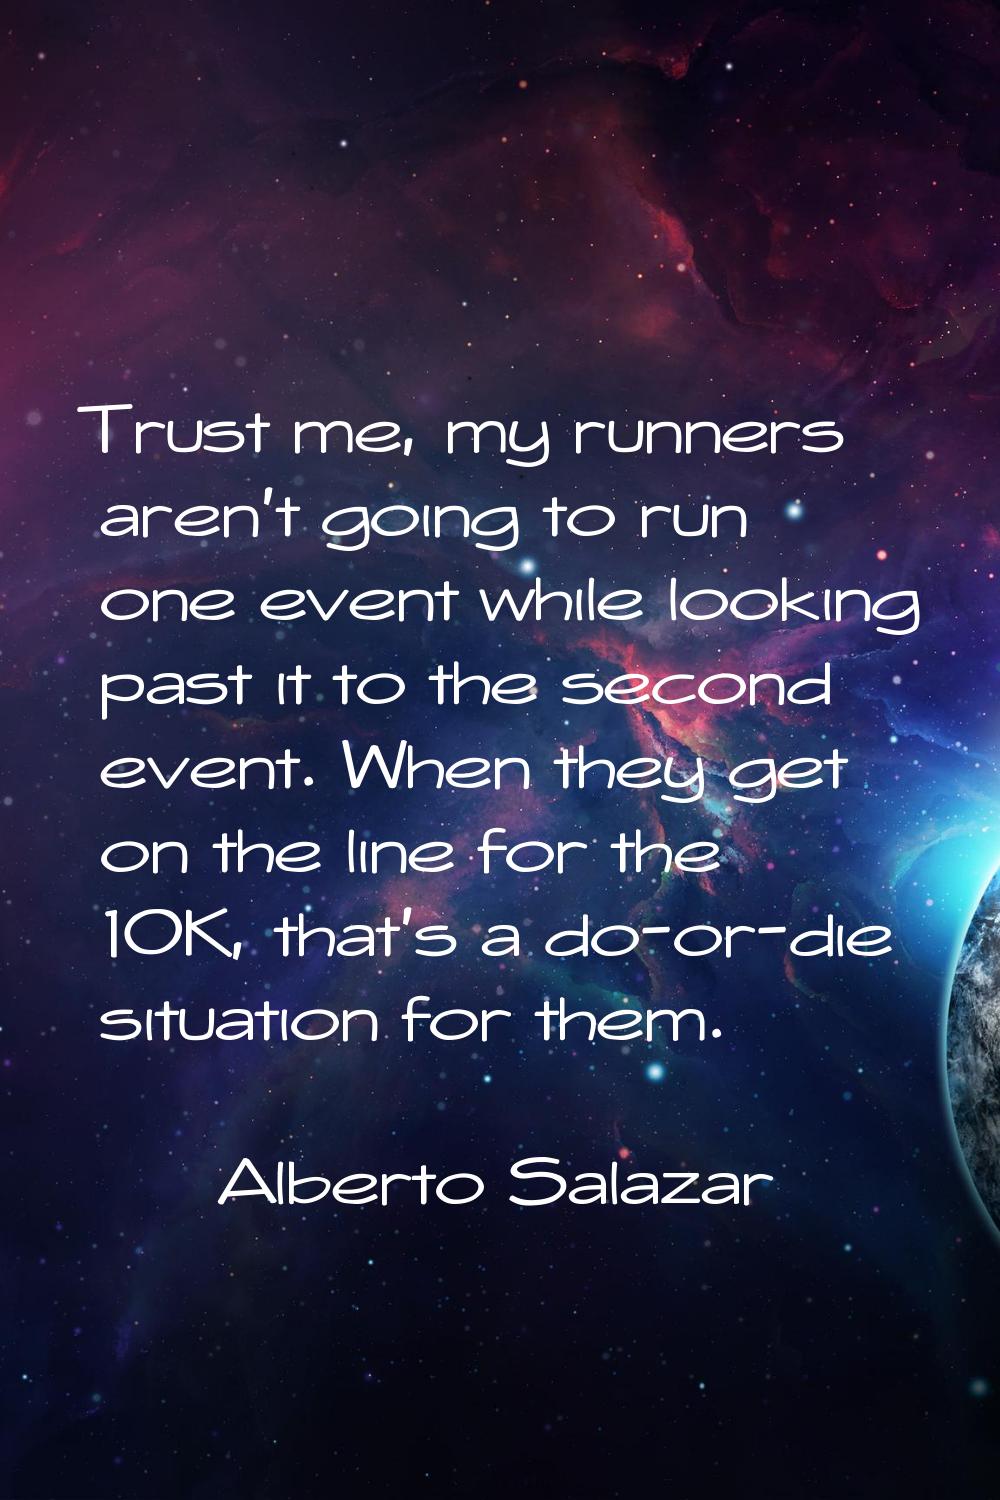 Trust me, my runners aren't going to run one event while looking past it to the second event. When 